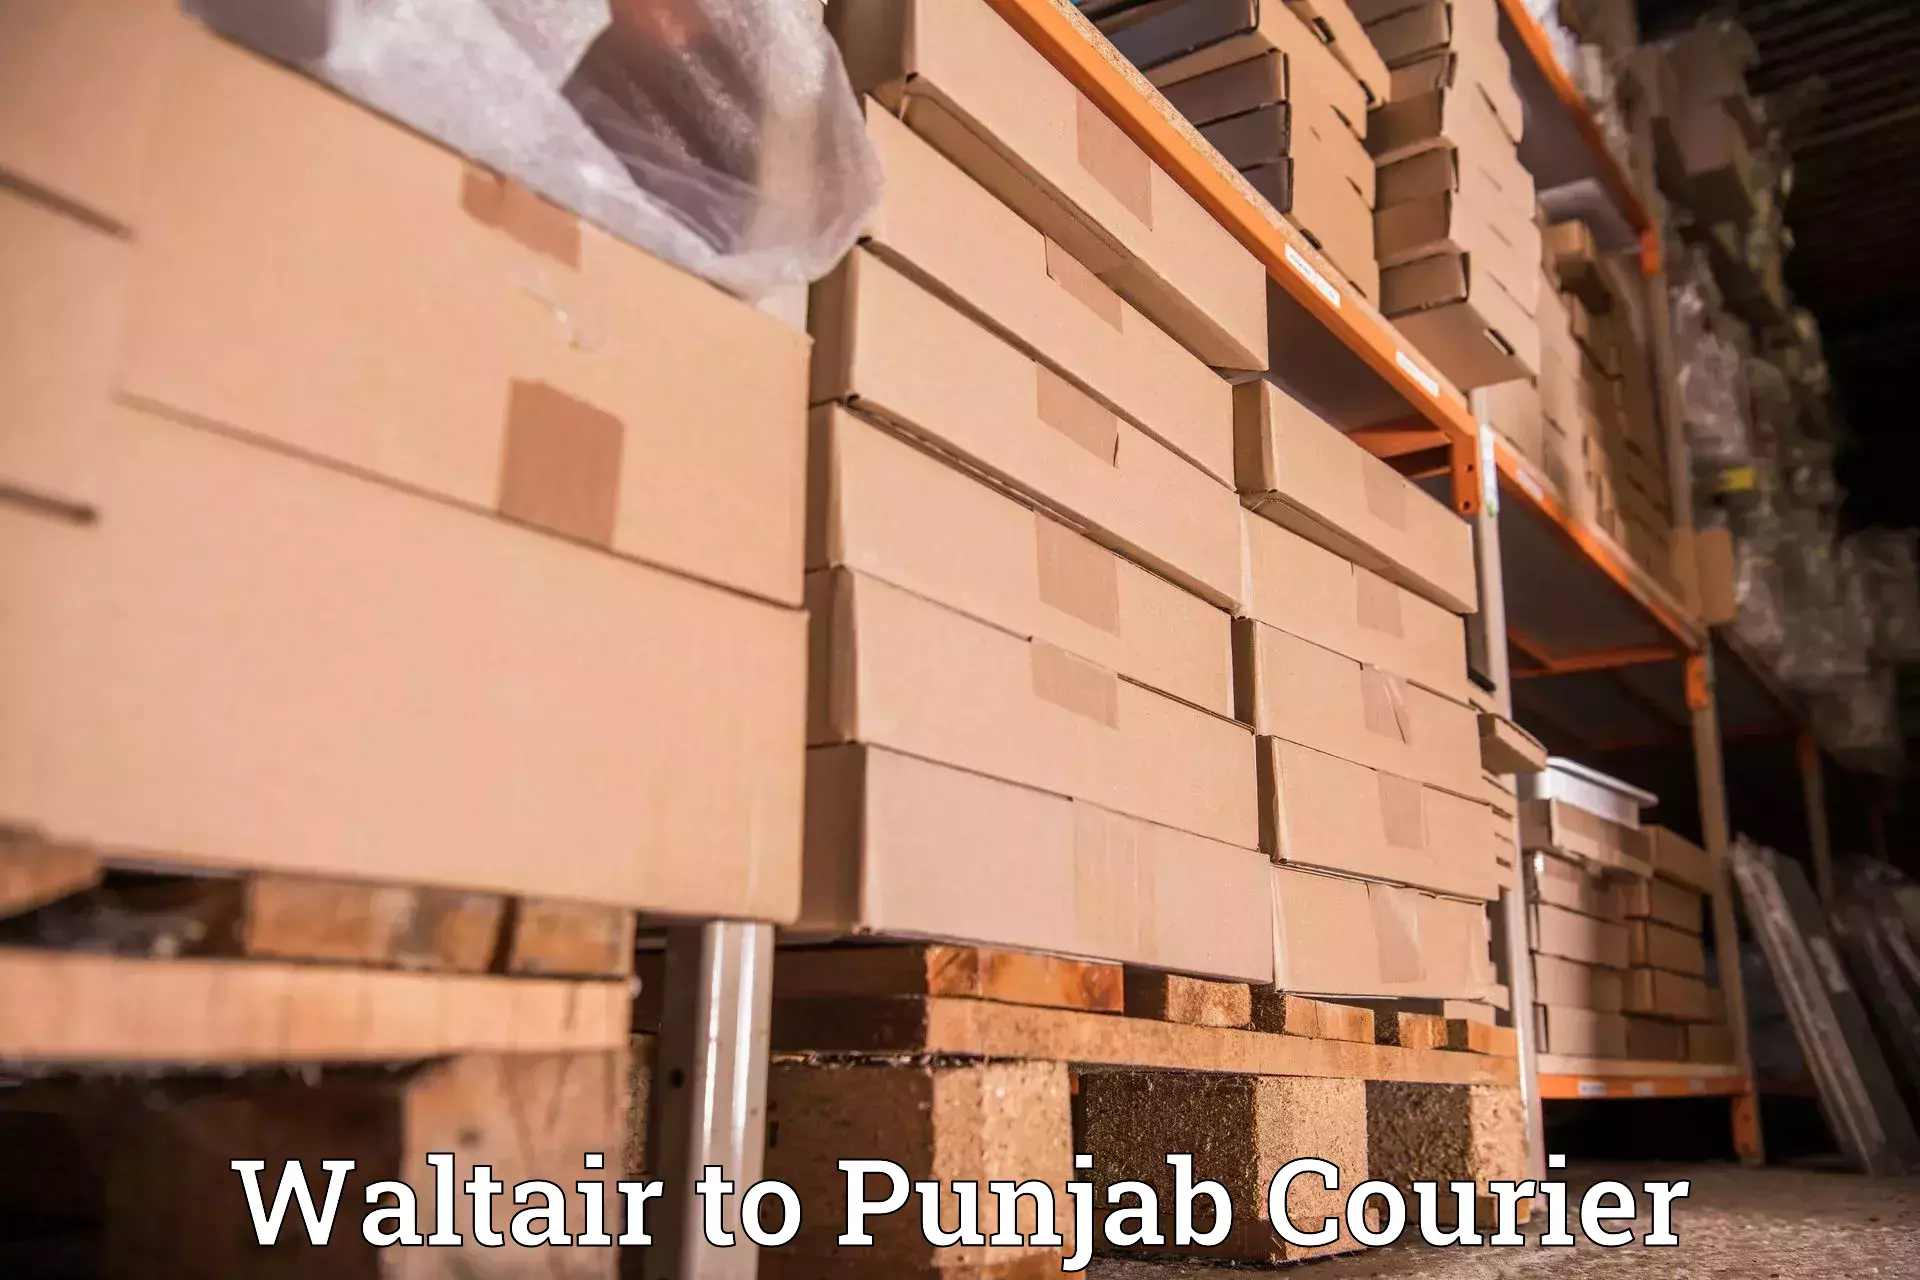 Urban courier service Waltair to Ludhiana